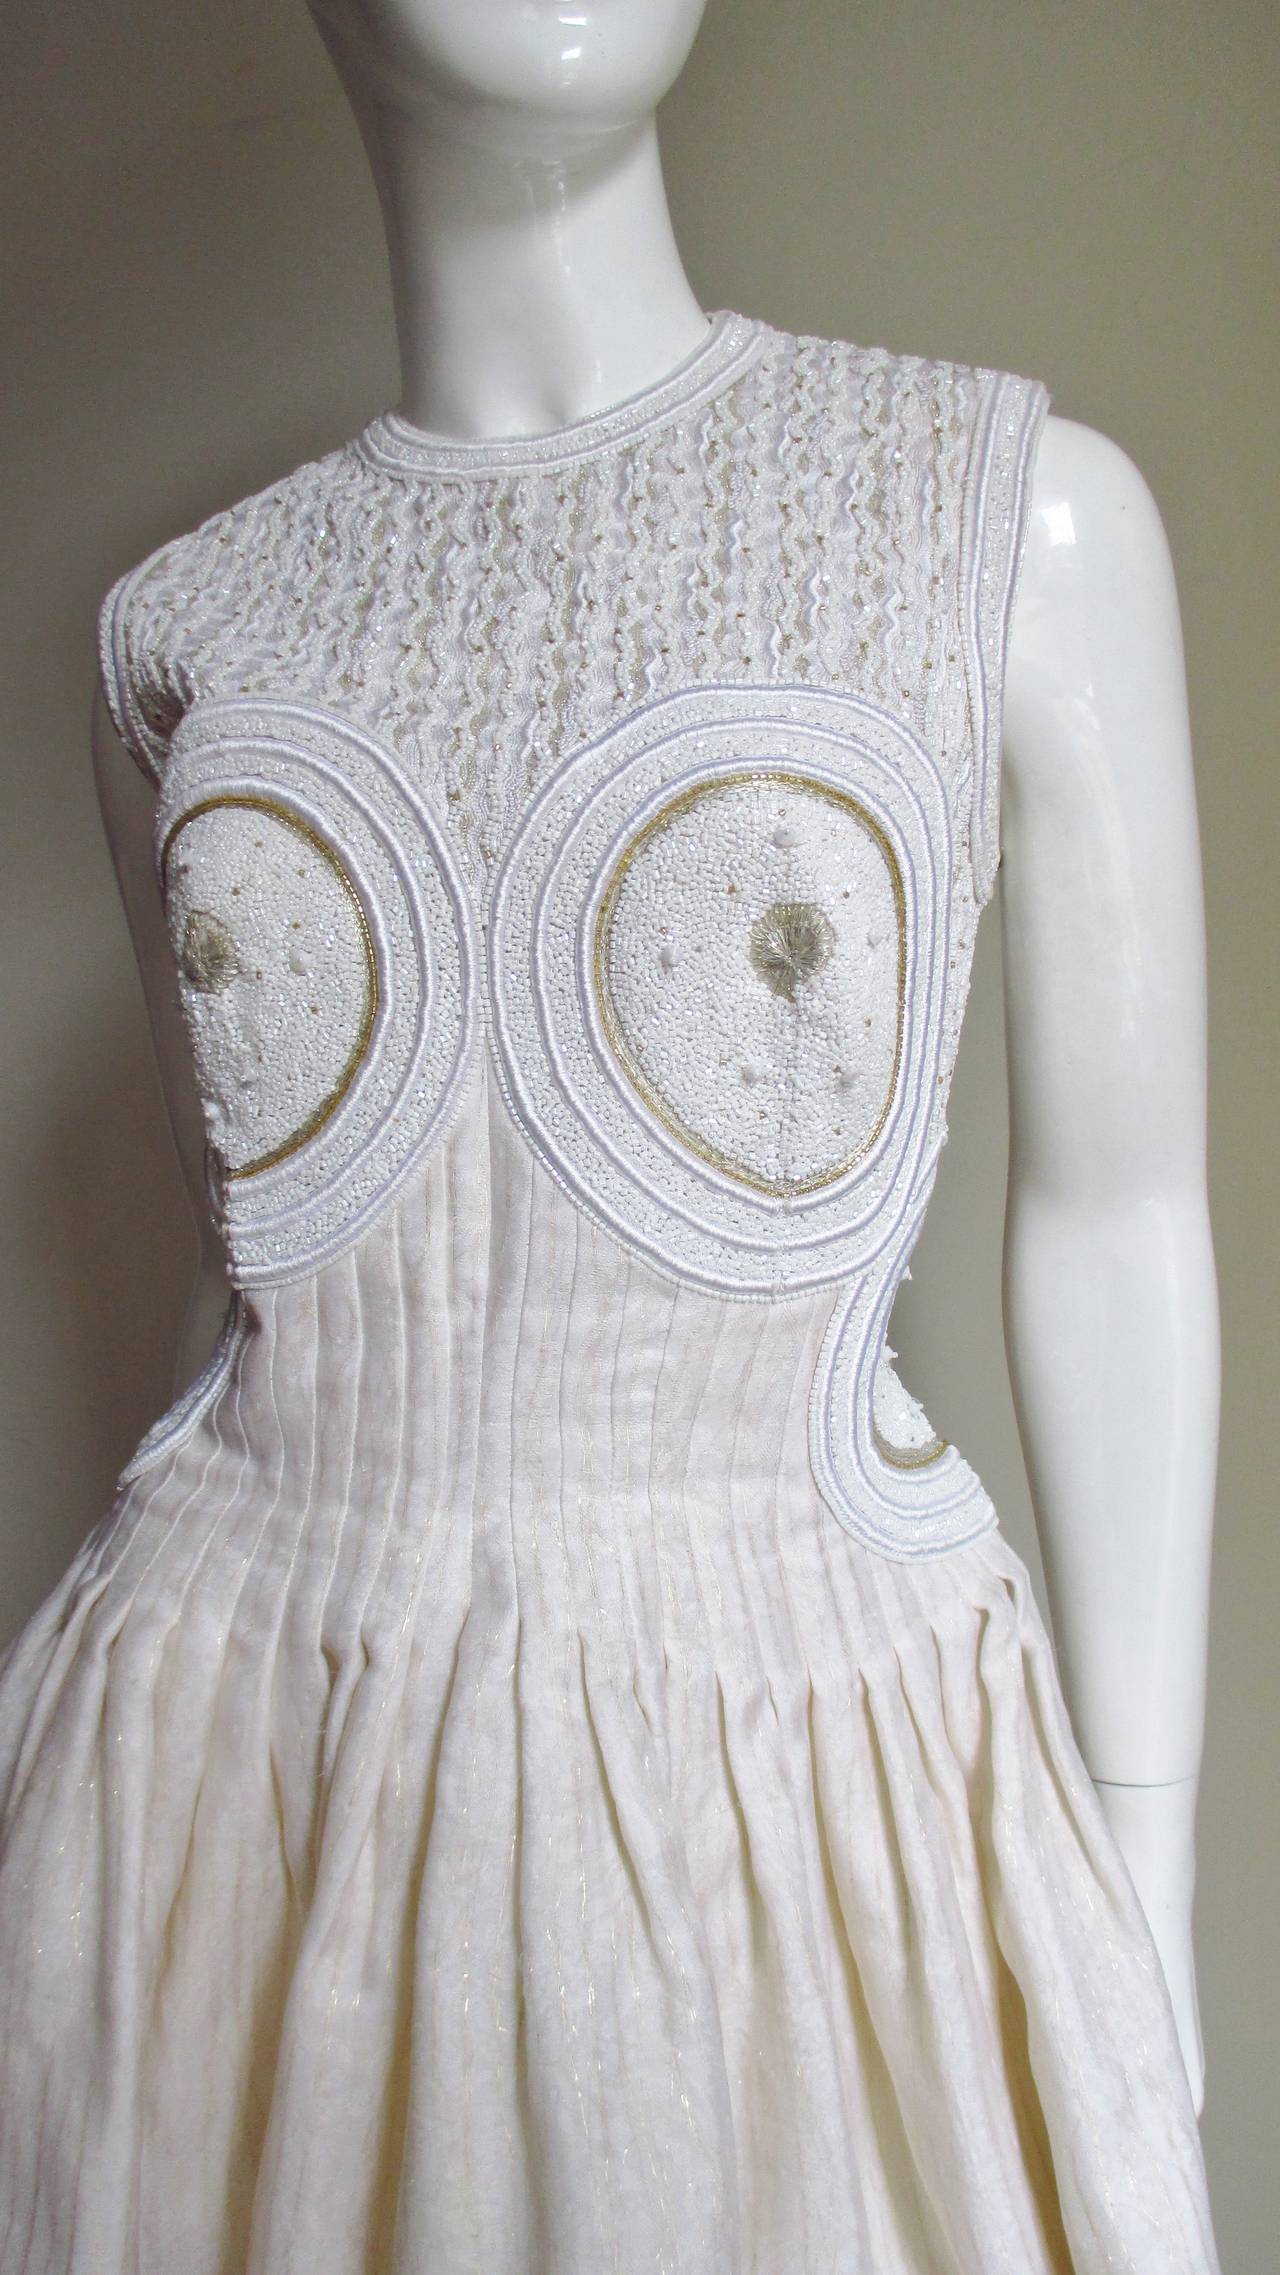 This is one of the more beautifully detailed beaded dresses I have seen- a work of art.  It is made of off white silk shot vertically with gold thread and stunning beading.  The front of the bodice is completely covered in glass beads- lines of tiny